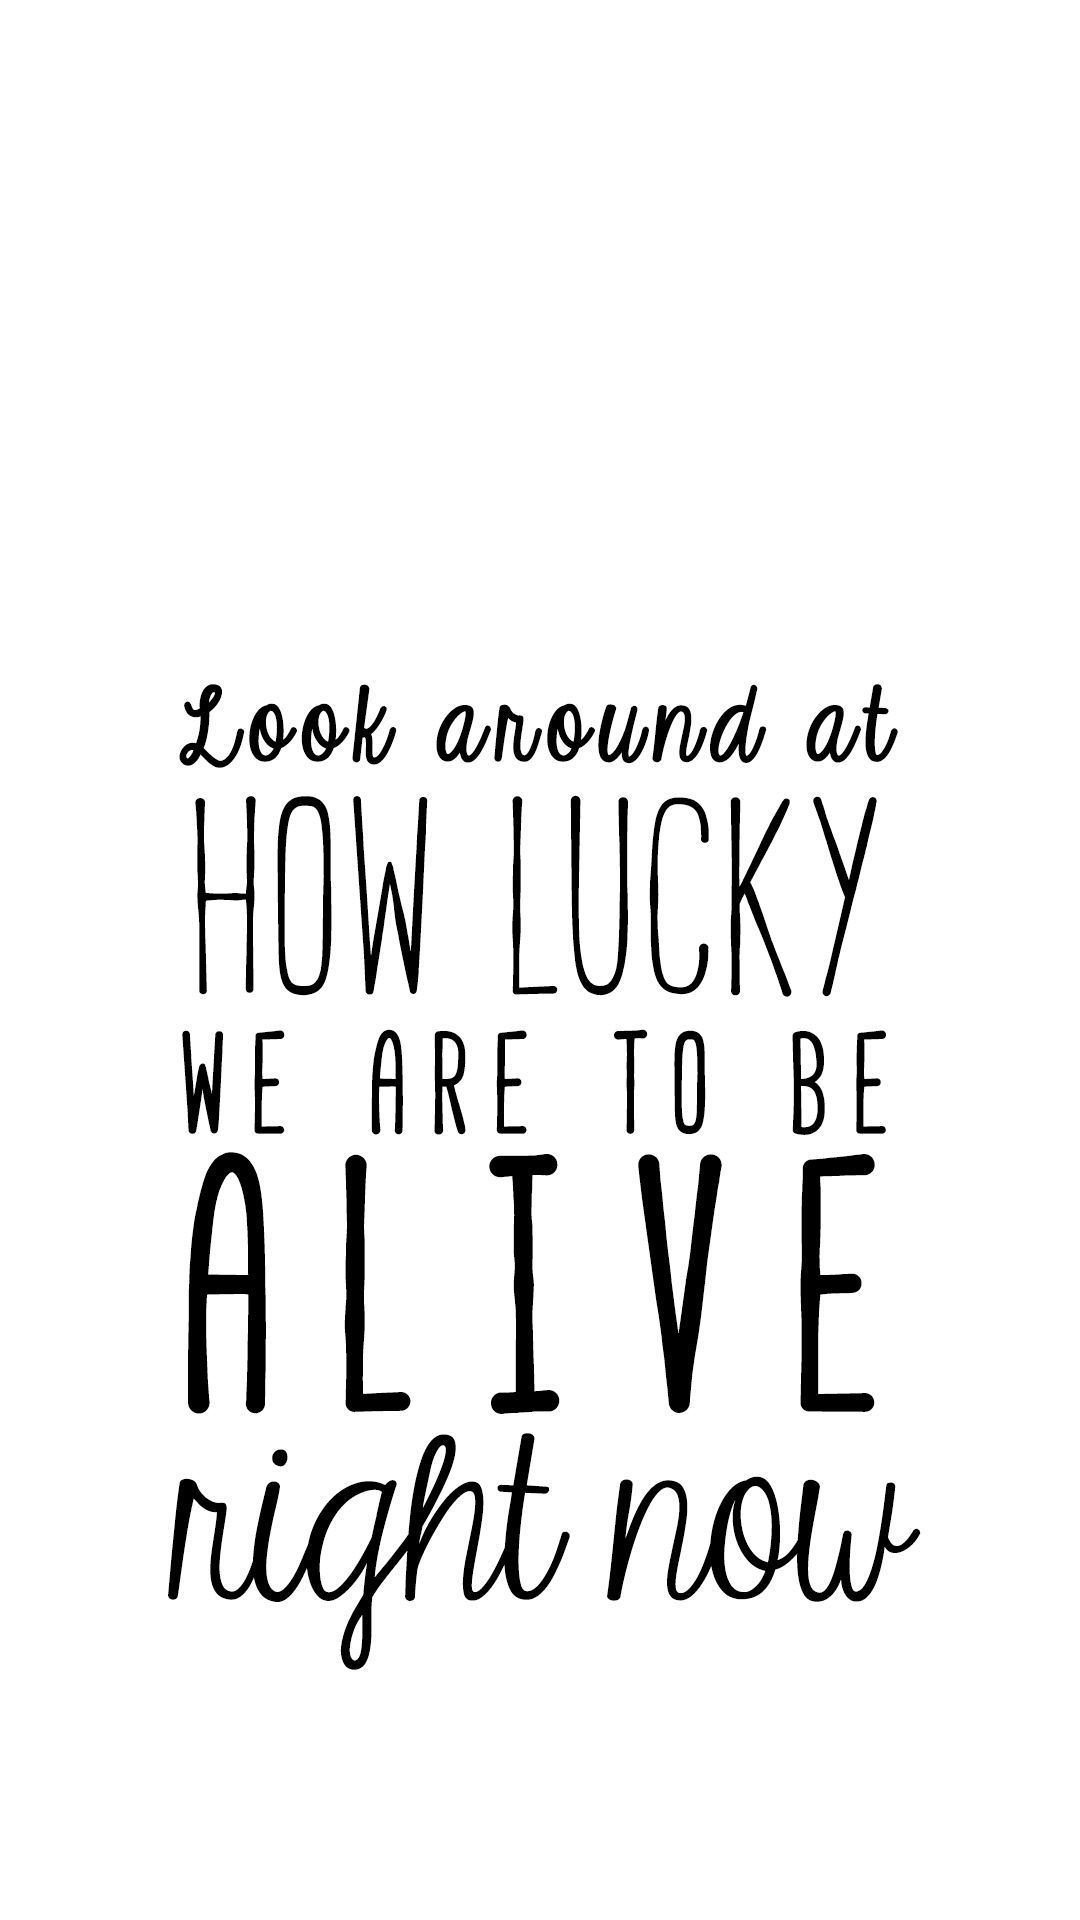 Look around how lucky we are to be alive - Broadway